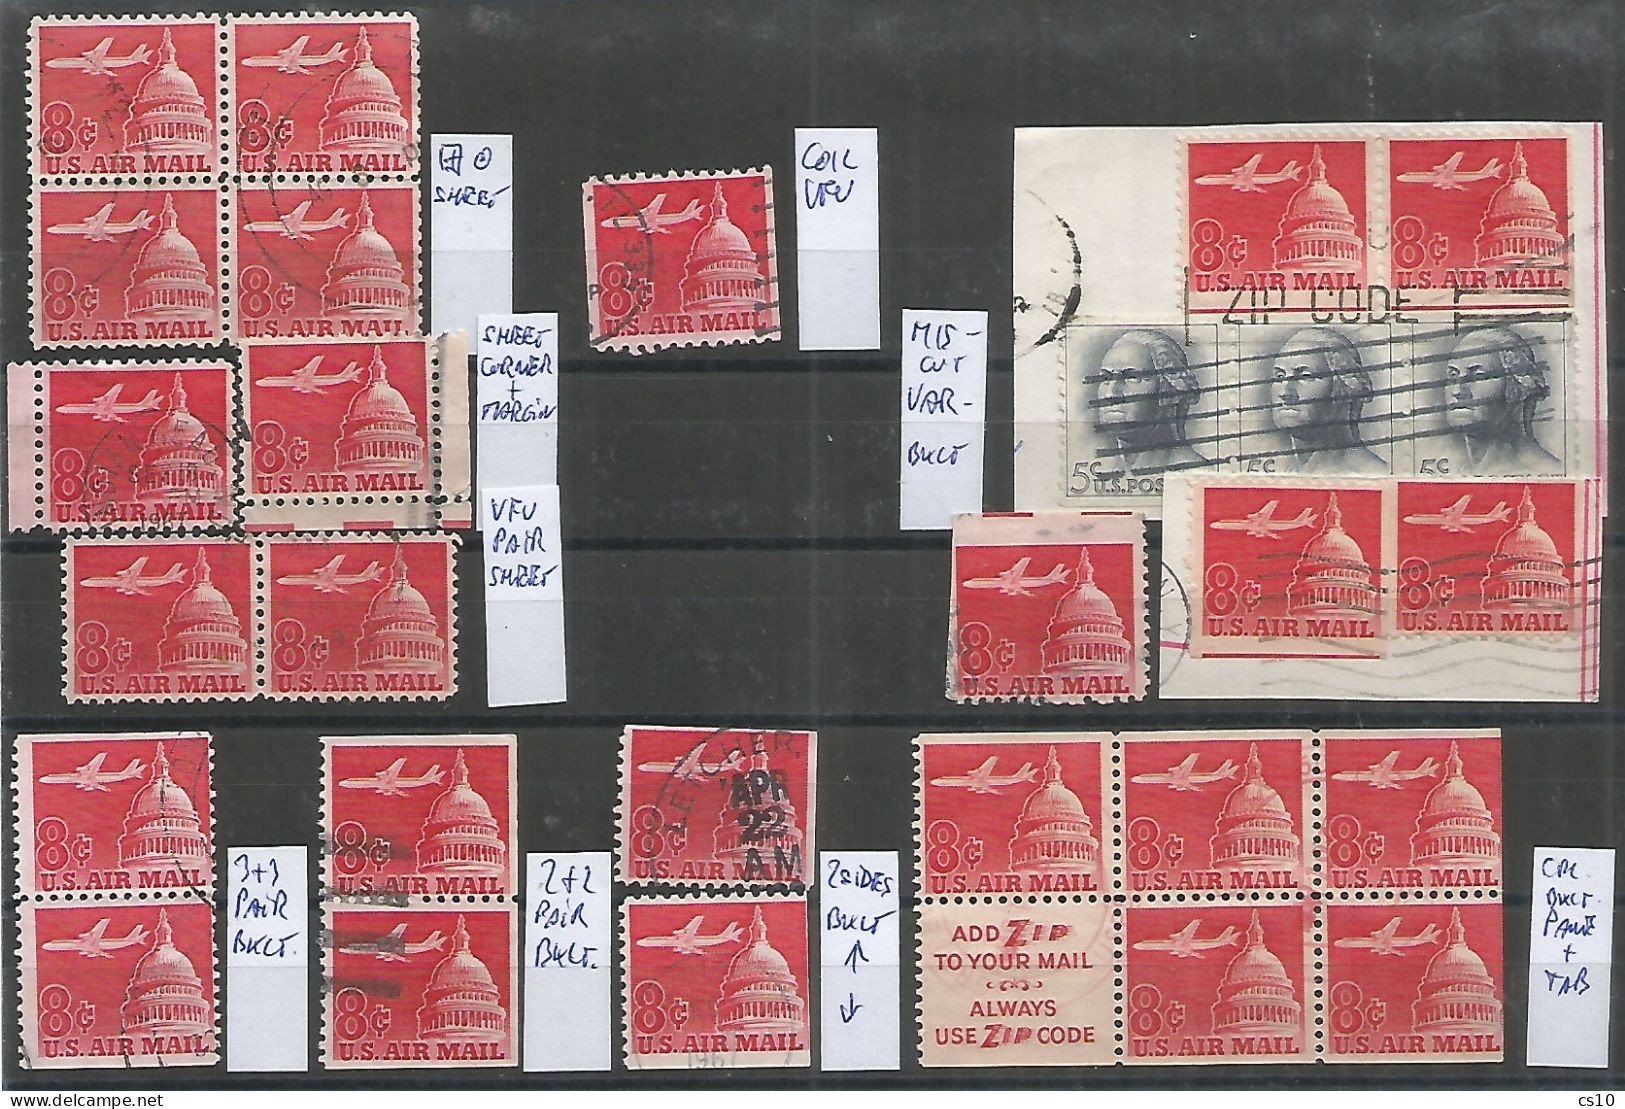 USA Airmail 1962 Jet & Capitol Dome SC# C64+65 Cpl Issue BL4 Sheet Coil Booklet Pane Pairs & Singles + Small Variety - 3a. 1961-… Afgestempeld